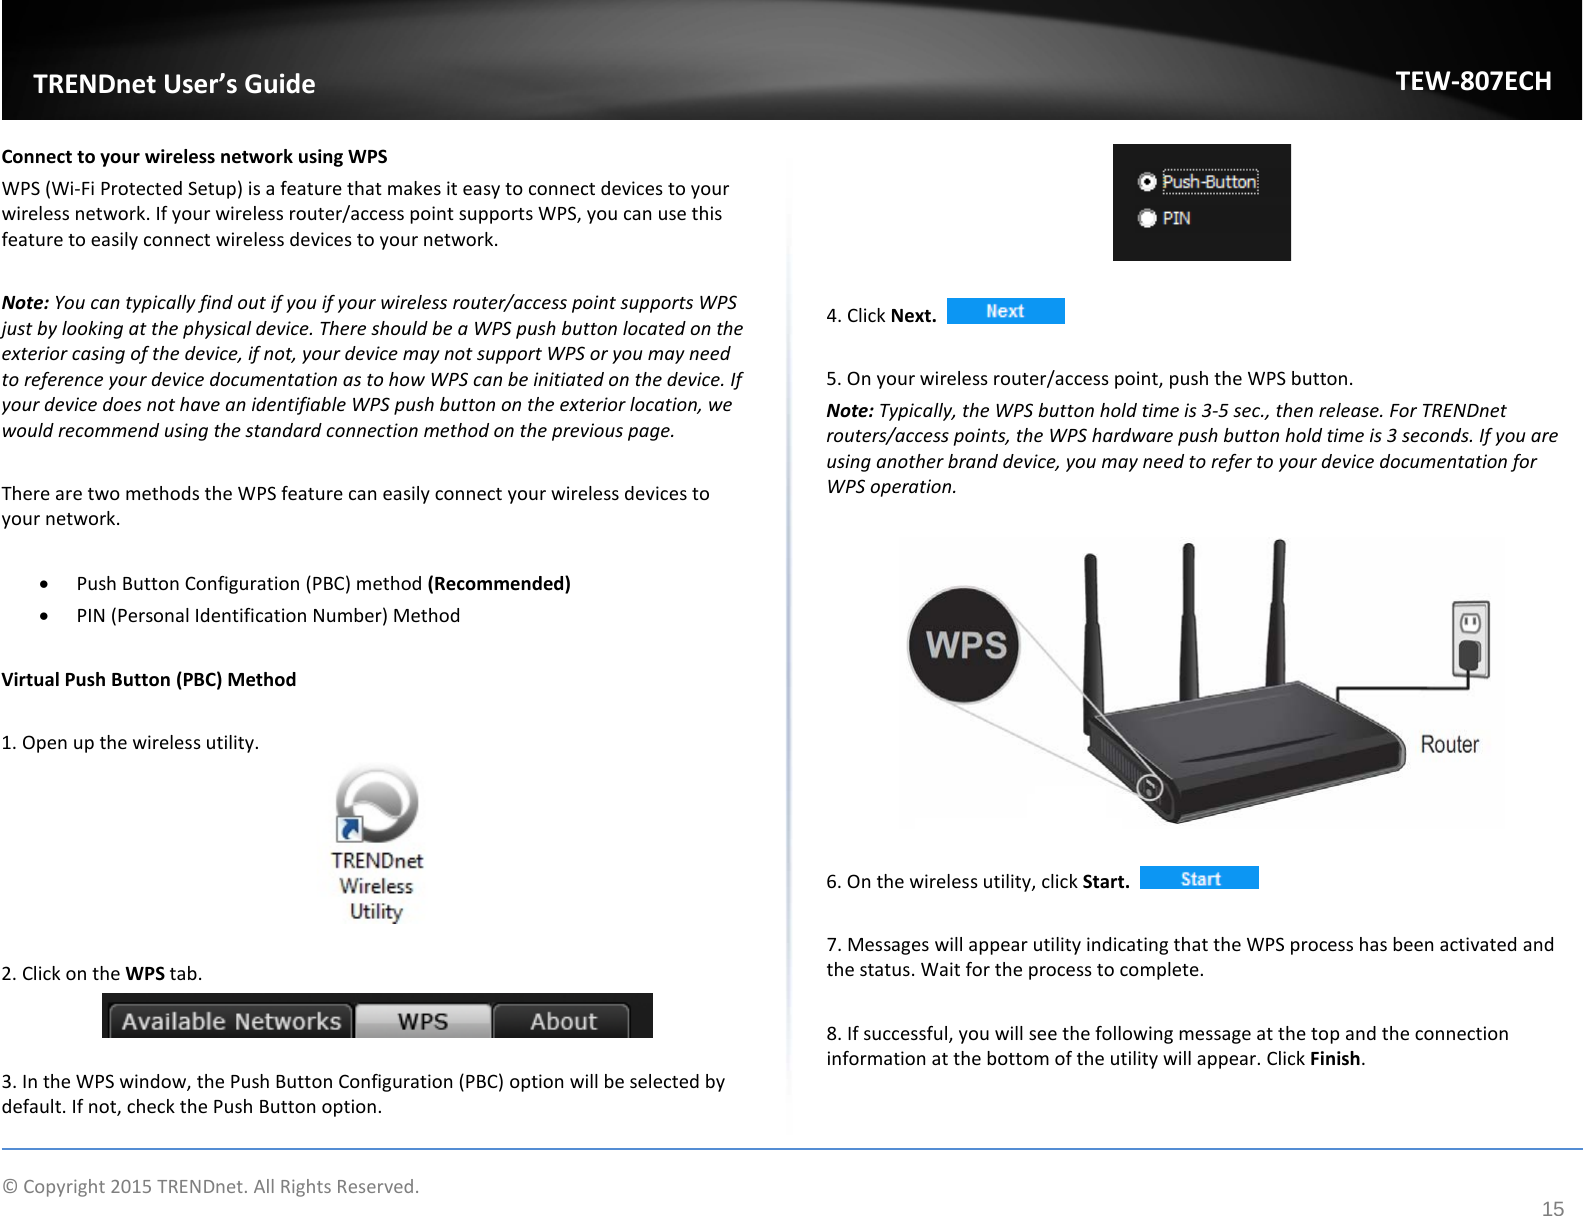              © Copyright 2015 TRENDnet. All Rights Reserved.       TRENDnet User’s Guide TEW-807ECH 15 Connect to your wireless network using WPS WPS (Wi-Fi Protected Setup) is a feature that makes it easy to connect devices to your wireless network. If your wireless router/access point supports WPS, you can use this feature to easily connect wireless devices to your network.   Note: You can typically find out if you if your wireless router/access point supports WPS just by looking at the physical device. There should be a WPS push button located on the exterior casing of the device, if not, your device may not support WPS or you may need to reference your device documentation as to how WPS can be initiated on the device. If your device does not have an identifiable WPS push button on the exterior location, we would recommend using the standard connection method on the previous page.  There are two methods the WPS feature can easily connect your wireless devices to your network.  • Push Button Configuration (PBC) method (Recommended) • PIN (Personal Identification Number) Method   Virtual Push Button (PBC) Method  1. Open up the wireless utility.    2. Click on the WPS tab.   3. In the WPS window, the Push Button Configuration (PBC) option will be selected by default. If not, check the Push Button option.   4. Click Next.     5. On your wireless router/access point, push the WPS button.  Note: Typically, the WPS button hold time is 3-5 sec., then release. For TRENDnet routers/access points, the WPS hardware push button hold time is 3 seconds. If you are using another brand device, you may need to refer to your device documentation for WPS operation.    6. On the wireless utility, click Start.     7. Messages will appear utility indicating that the WPS process has been activated and the status. Wait for the process to complete.  8. If successful, you will see the following message at the top and the connection information at the bottom of the utility will appear. Click Finish. 